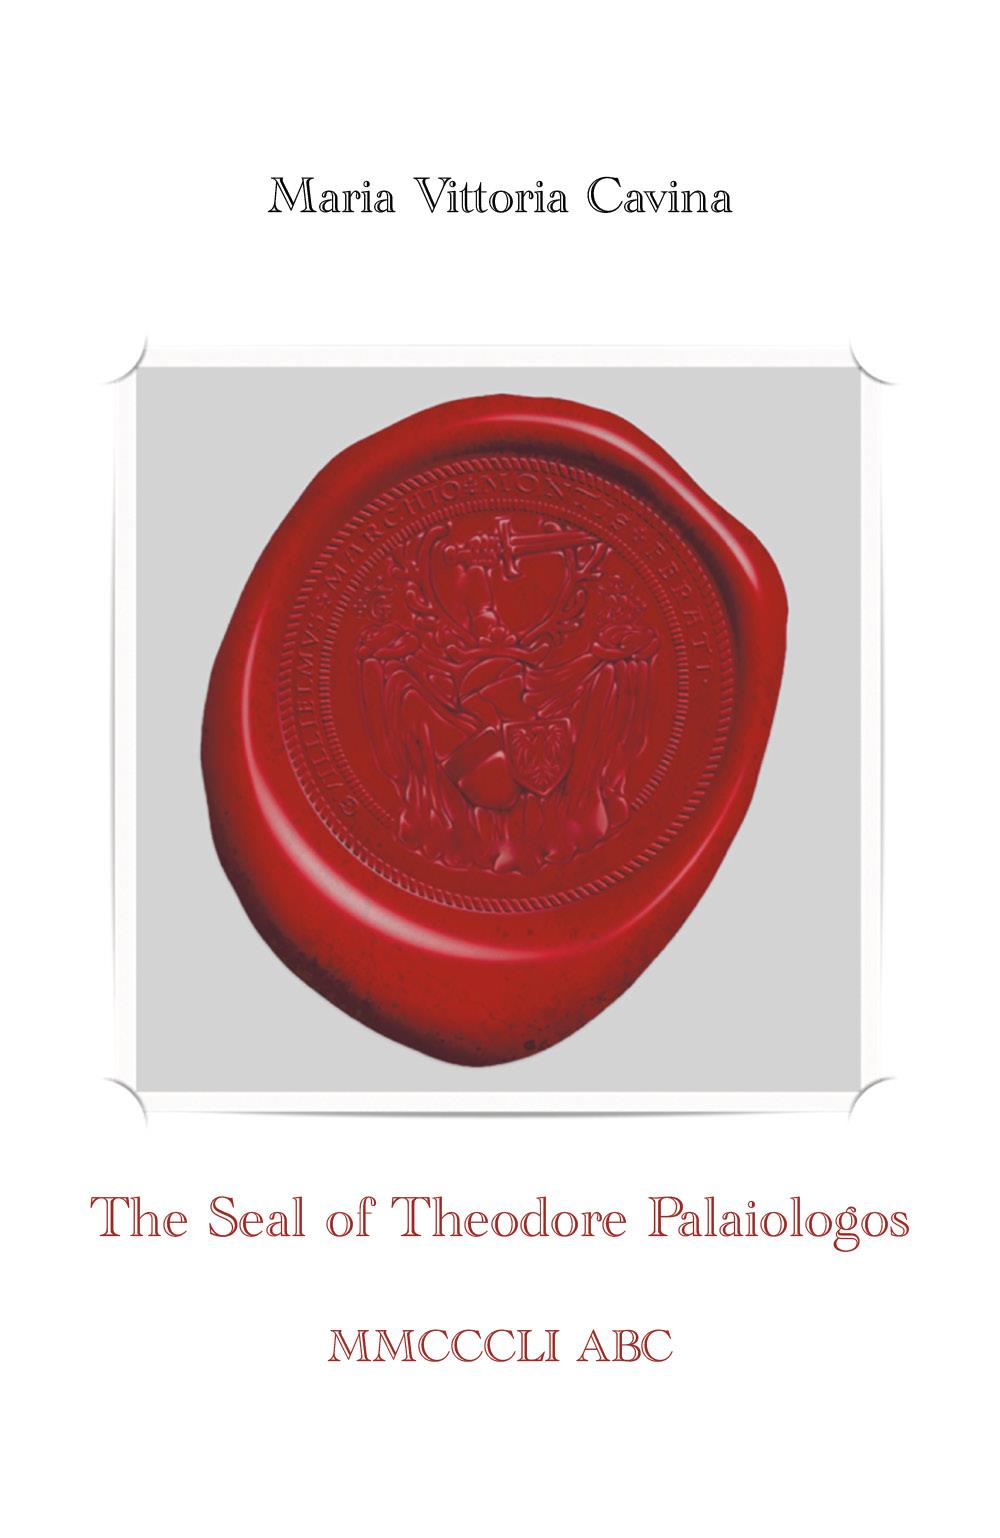 The Seal of Theodore Palaiologos